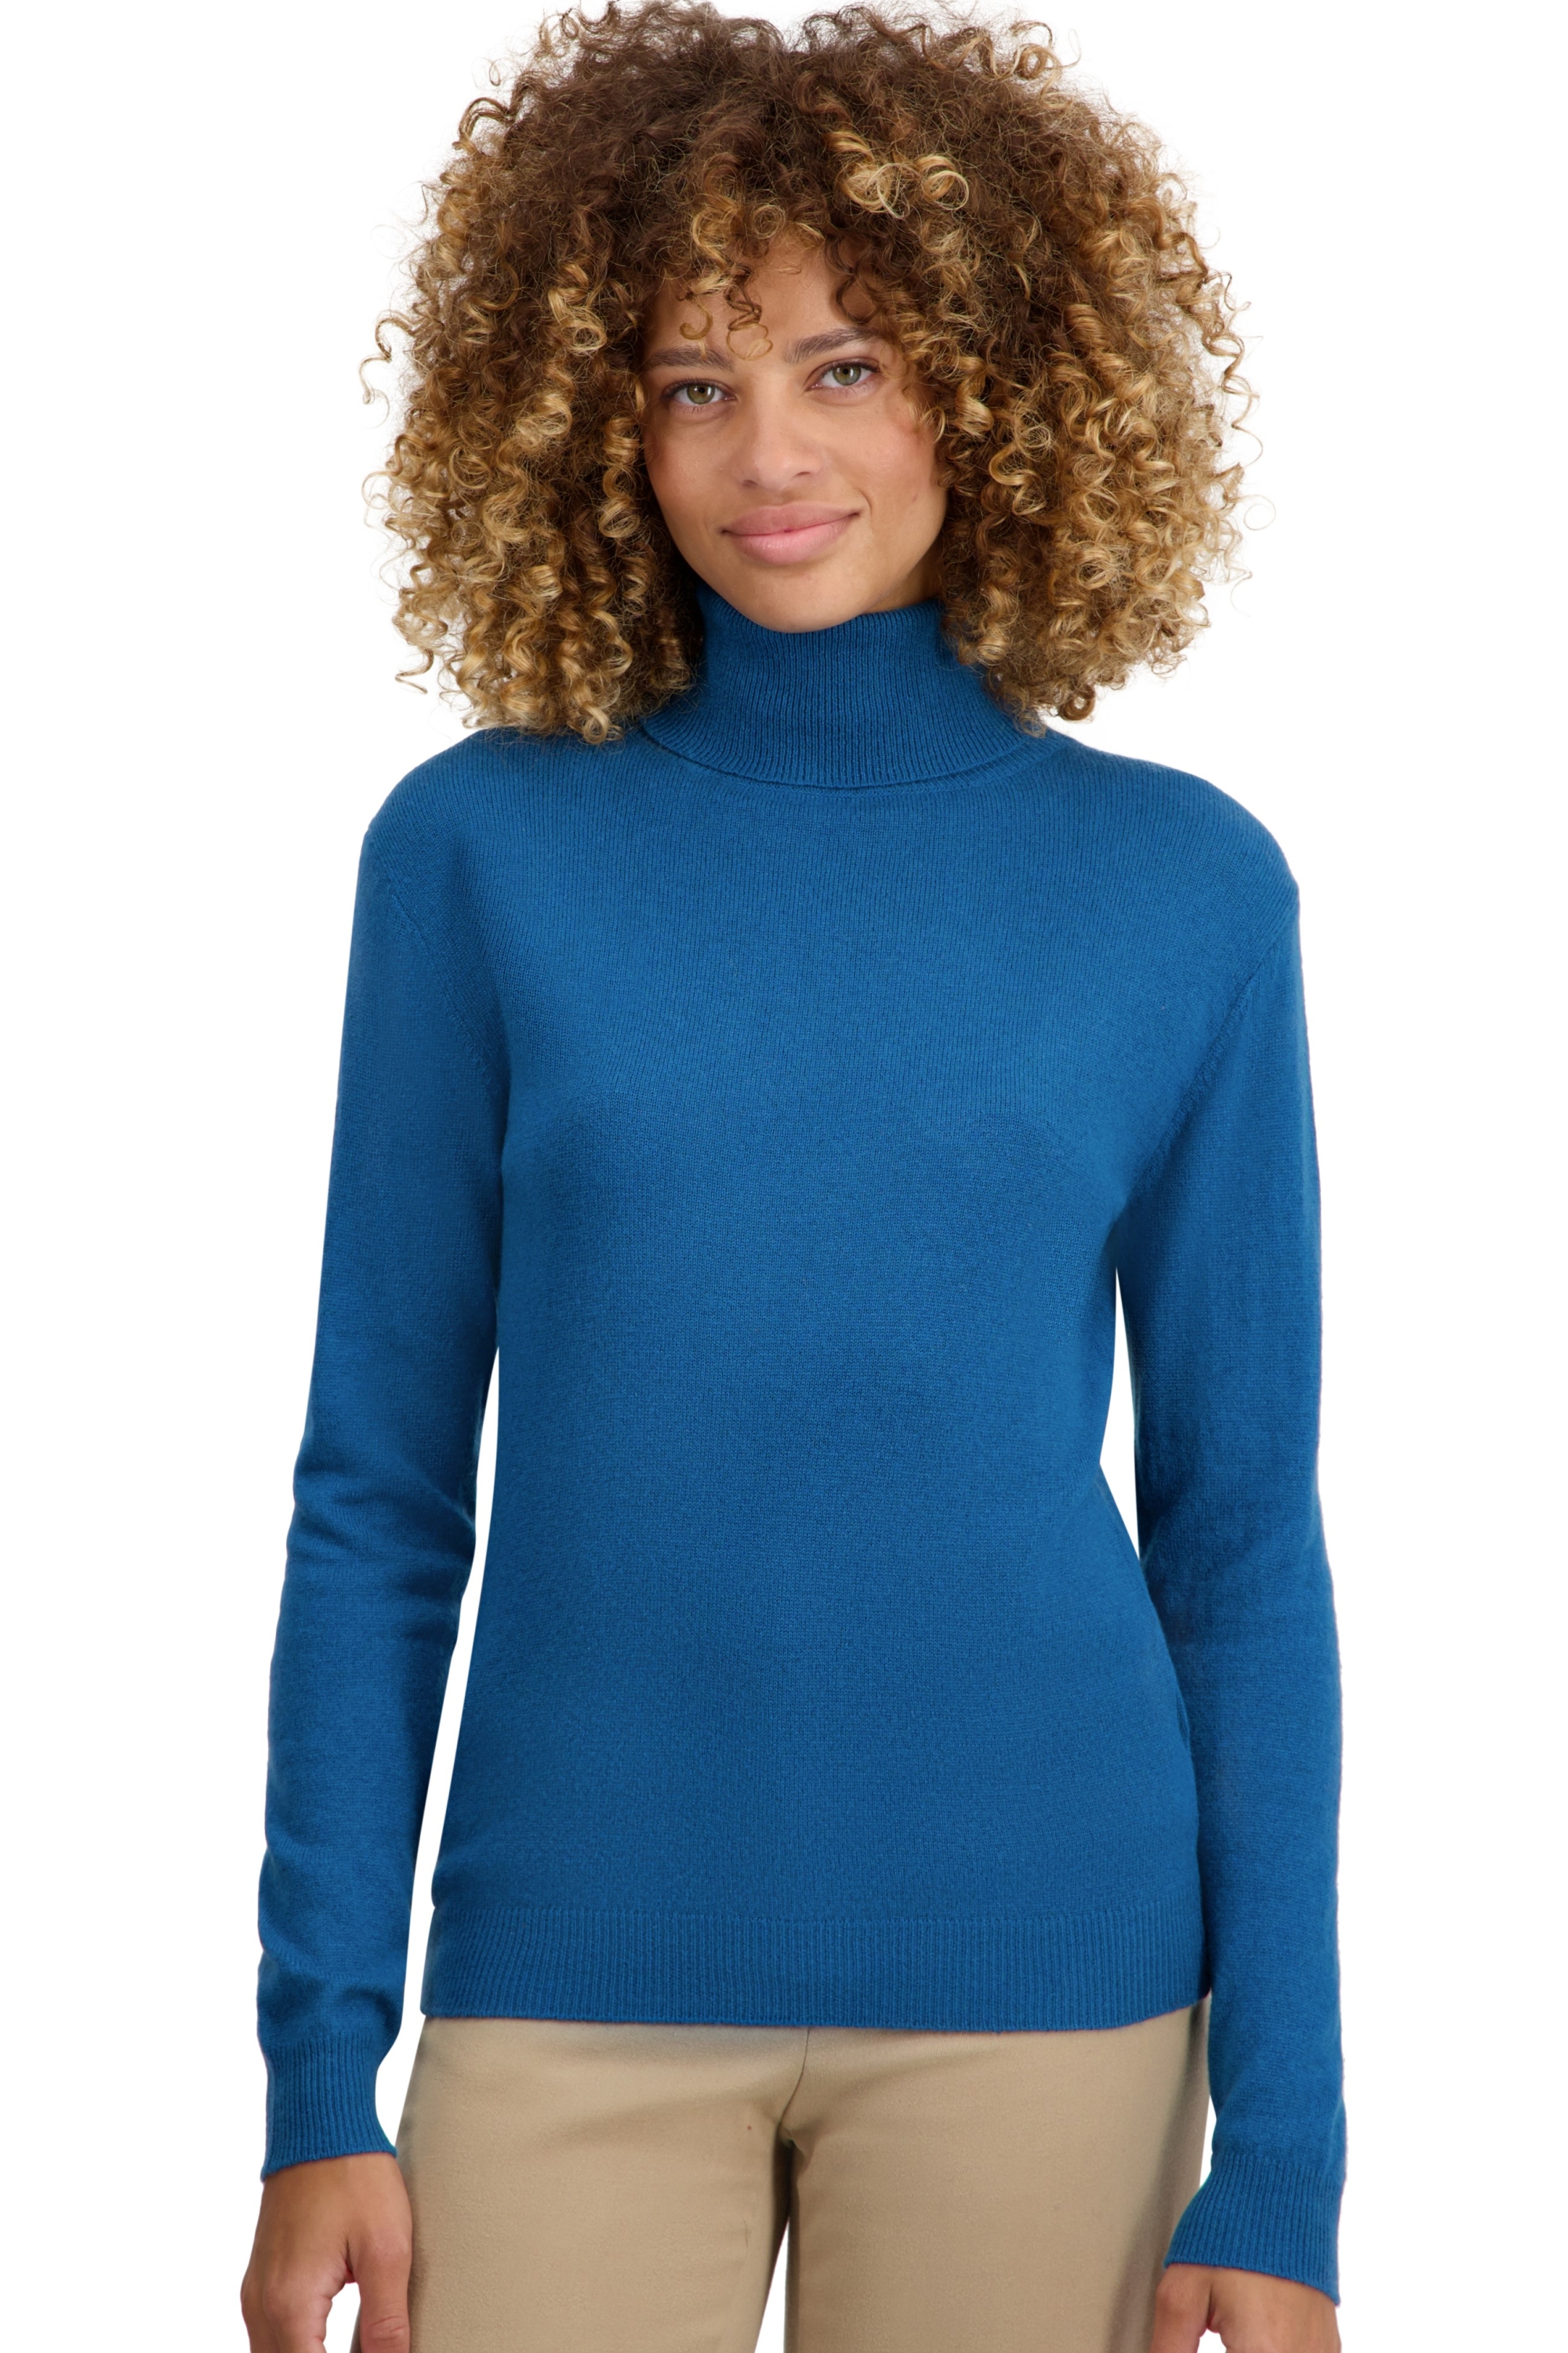 Cashmere ladies roll neck tale first everglade s